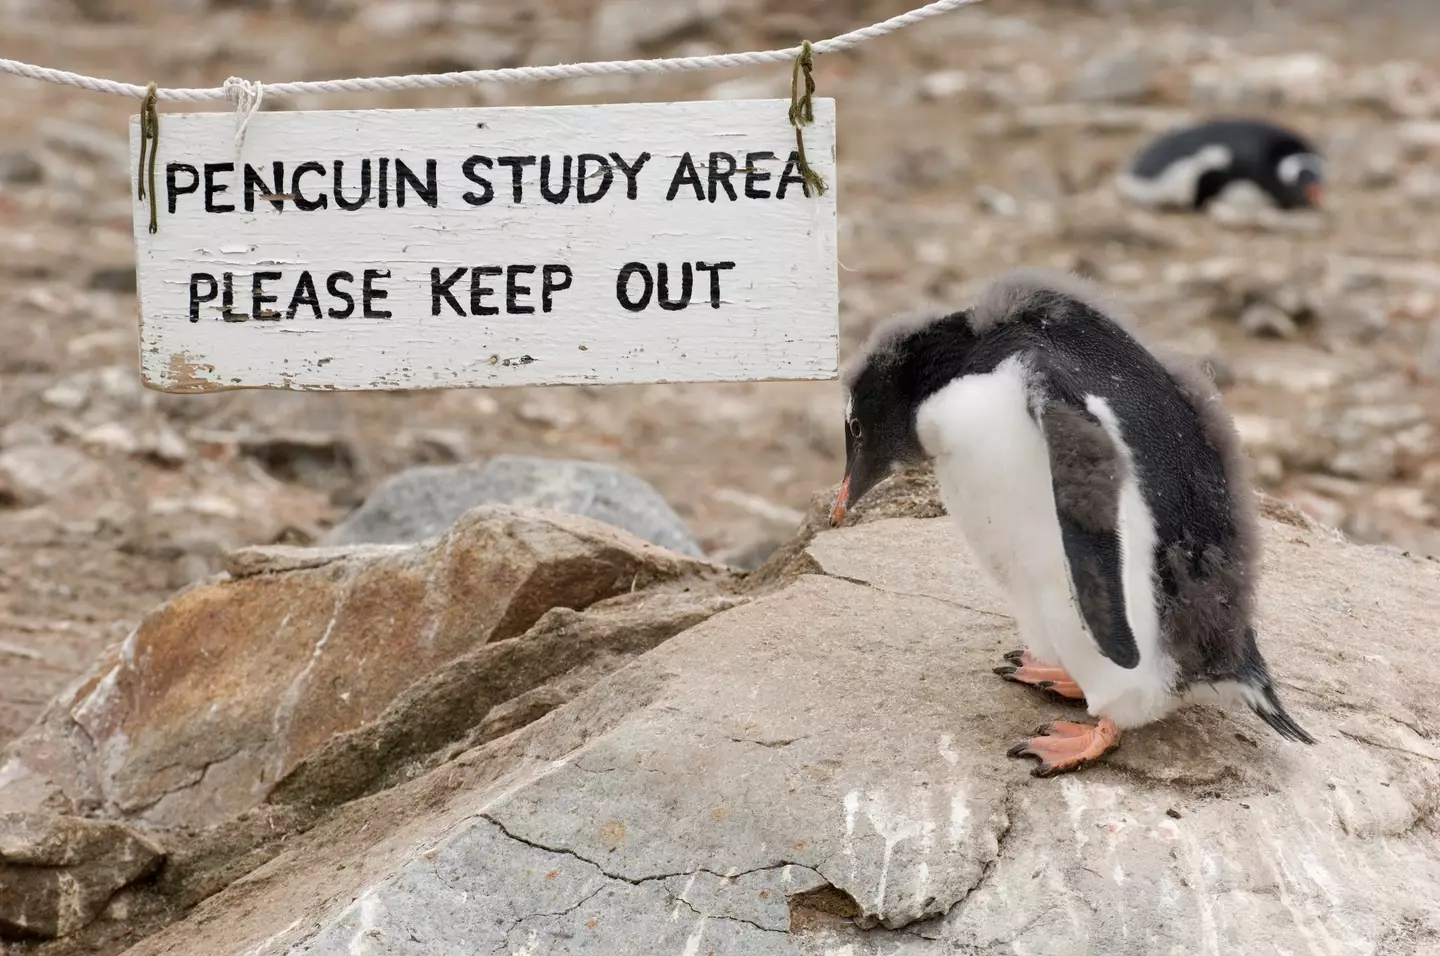 One of the key specifications of the job is the ability to count penguins.